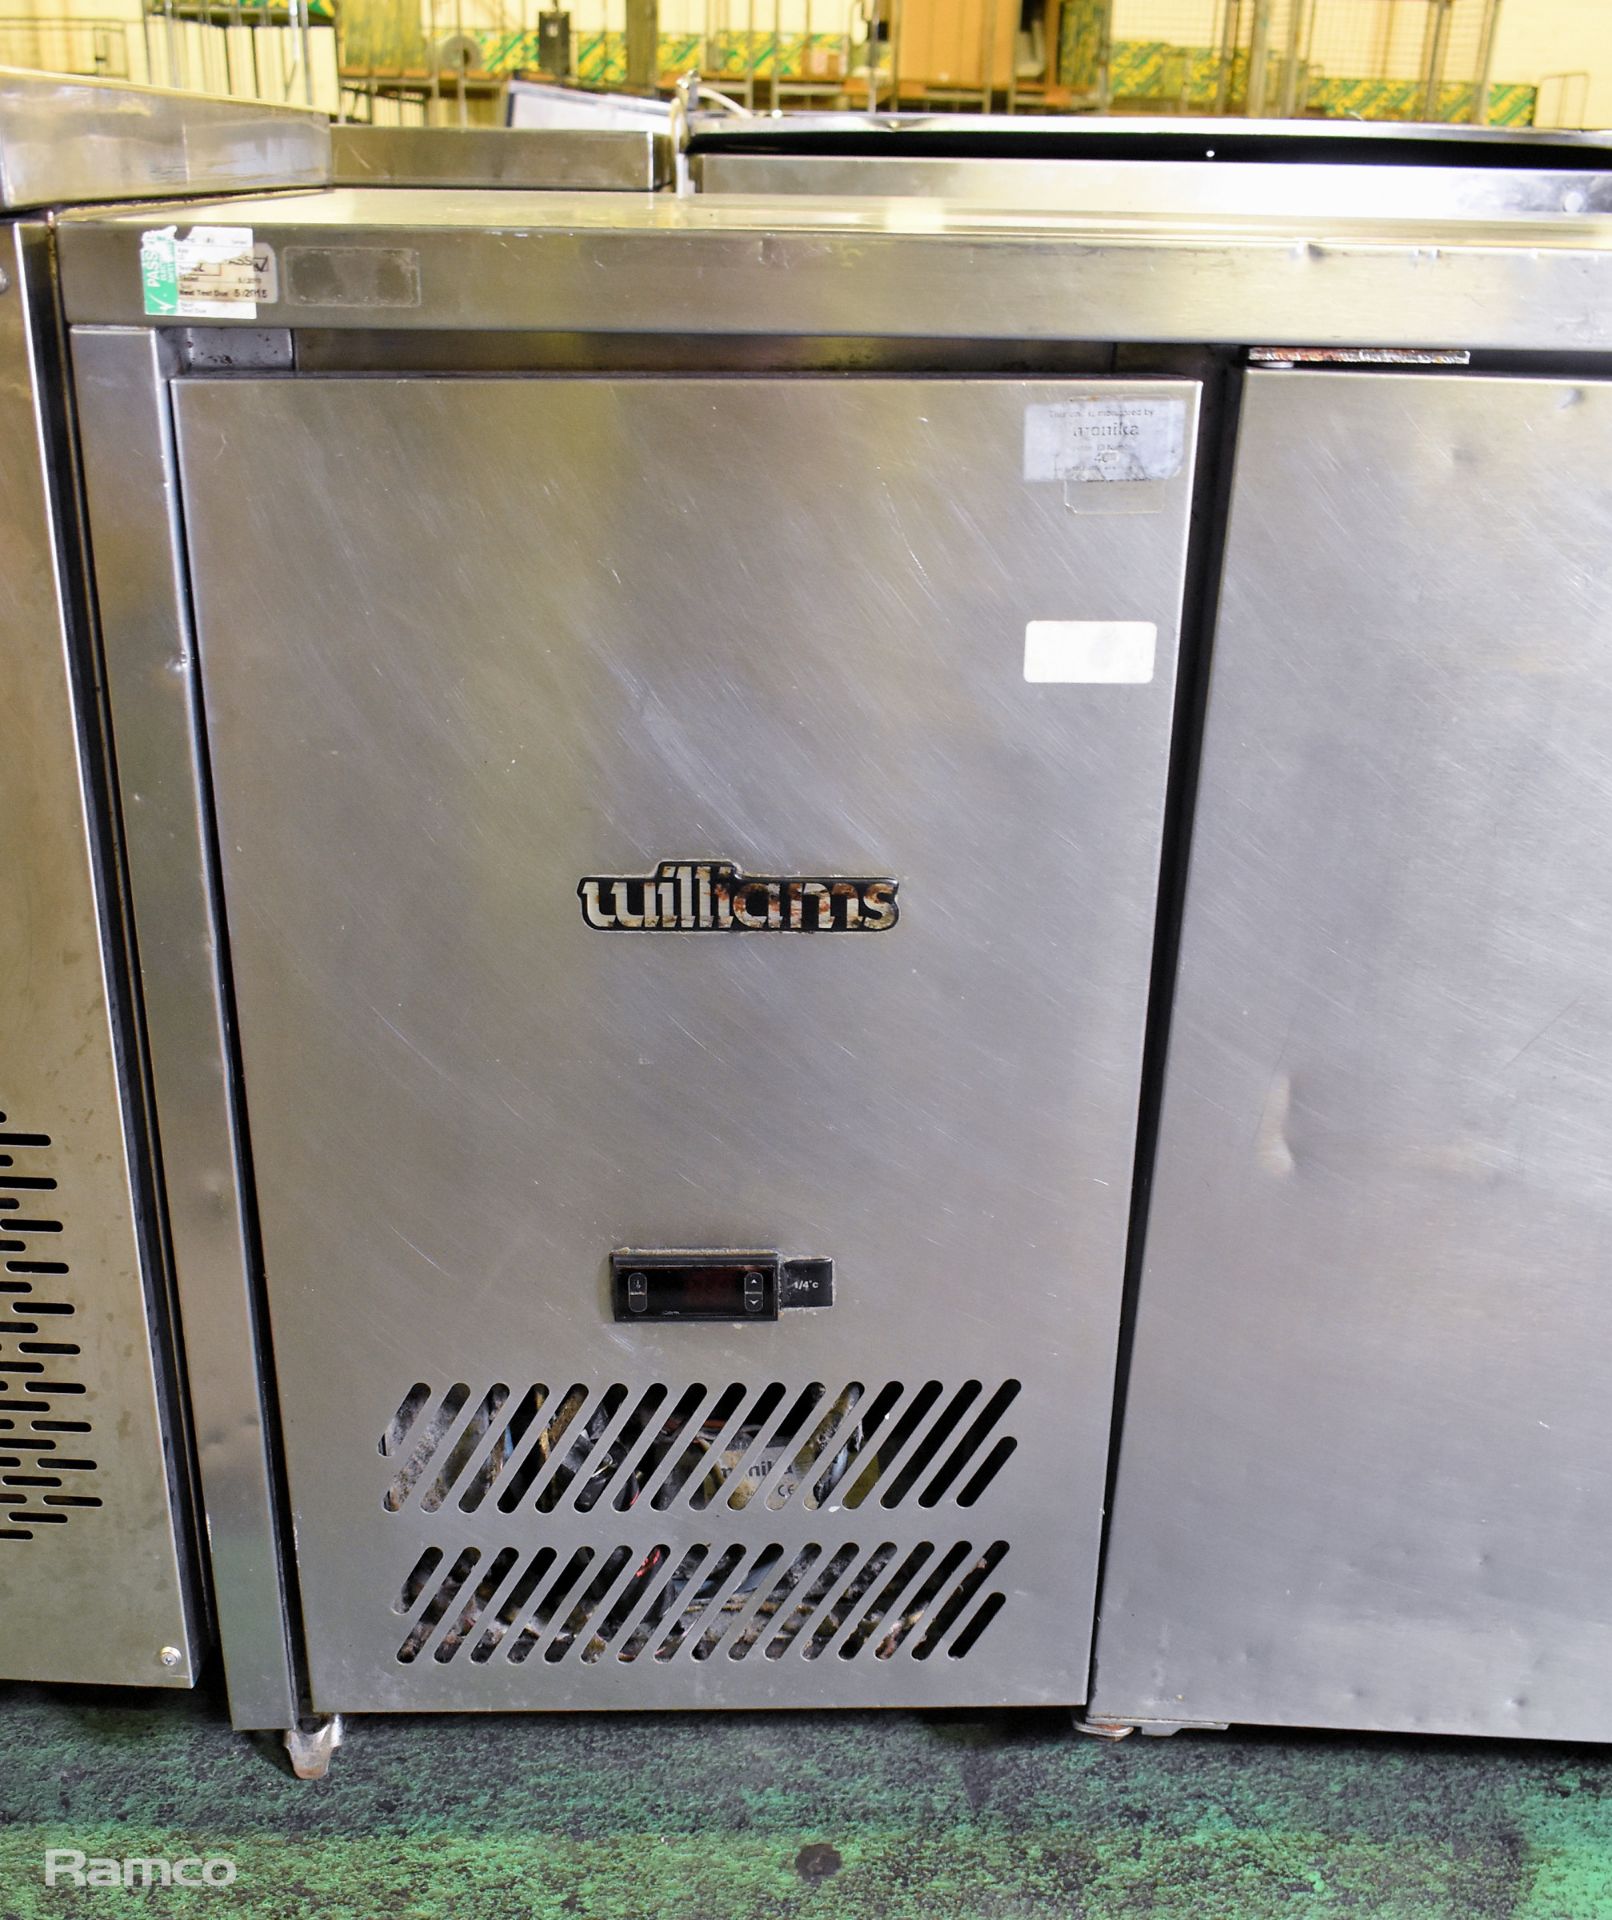 Williams HJC2SA stainless steel double door counter fridge - W 1420 x D 650 x H 800mm - Image 6 of 7